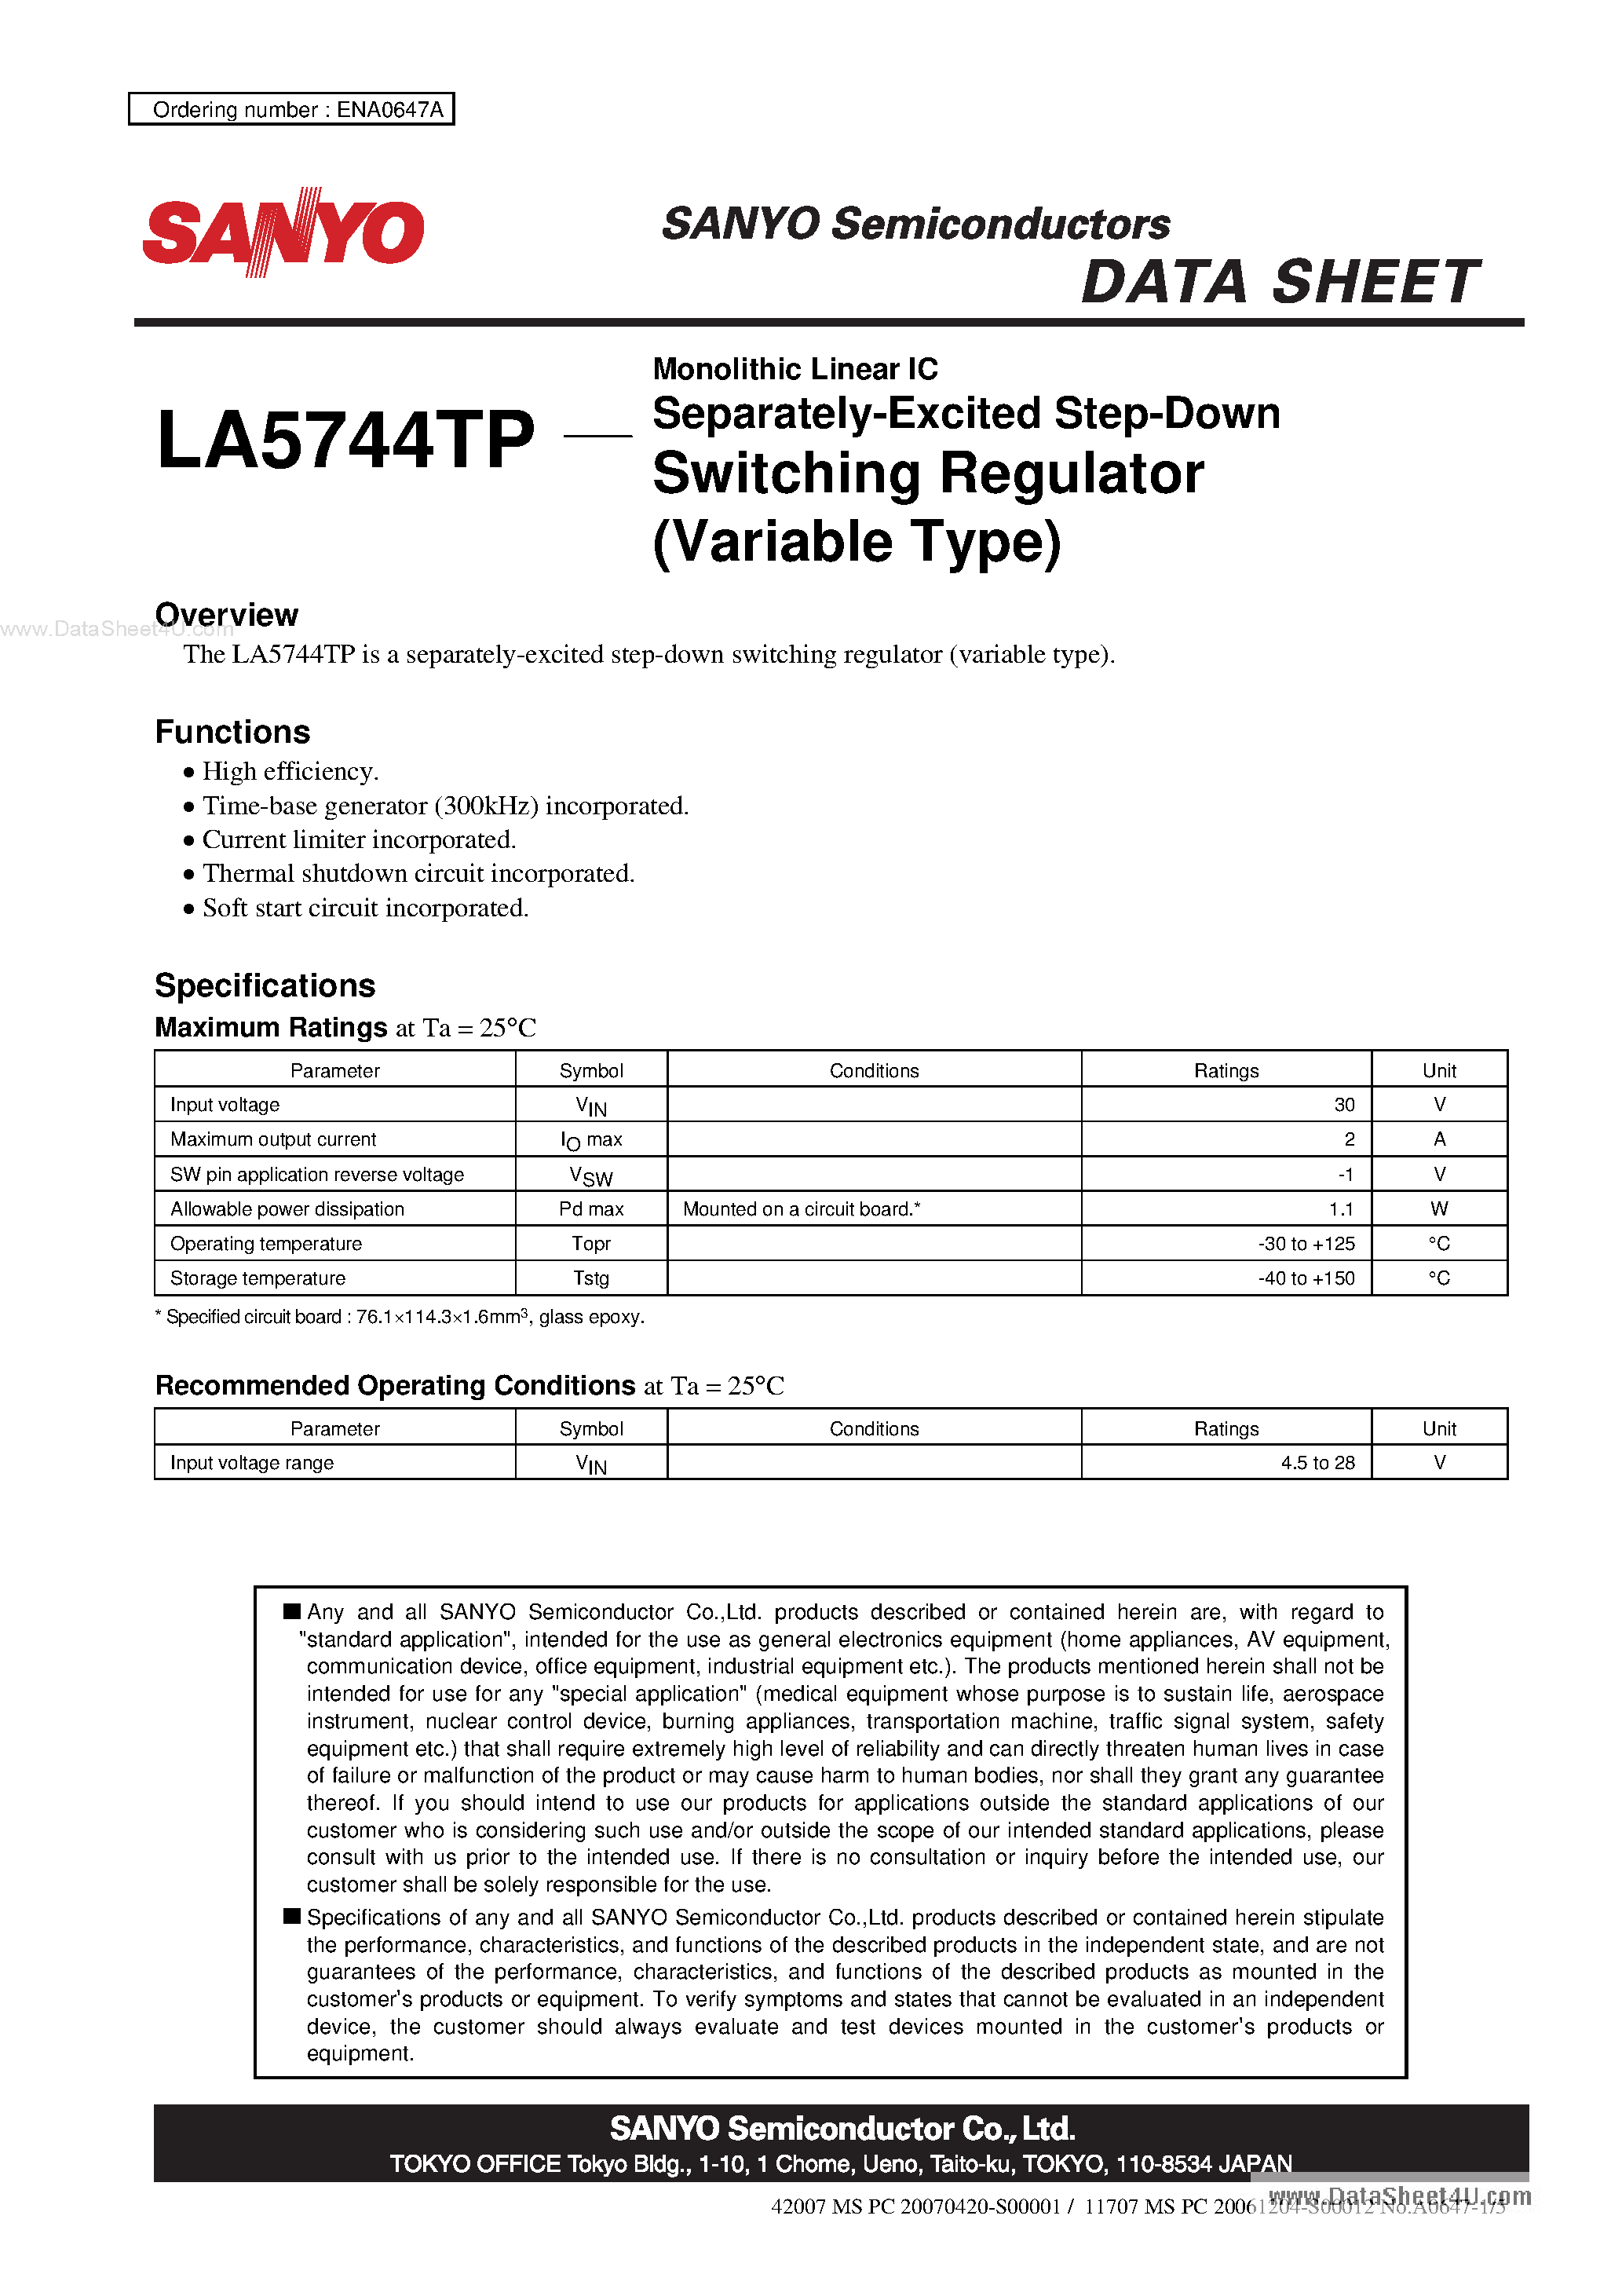 Datasheet LA5744TP - Monolithic Linear IC Separately-Excited Step-Down Switching Regulator page 1